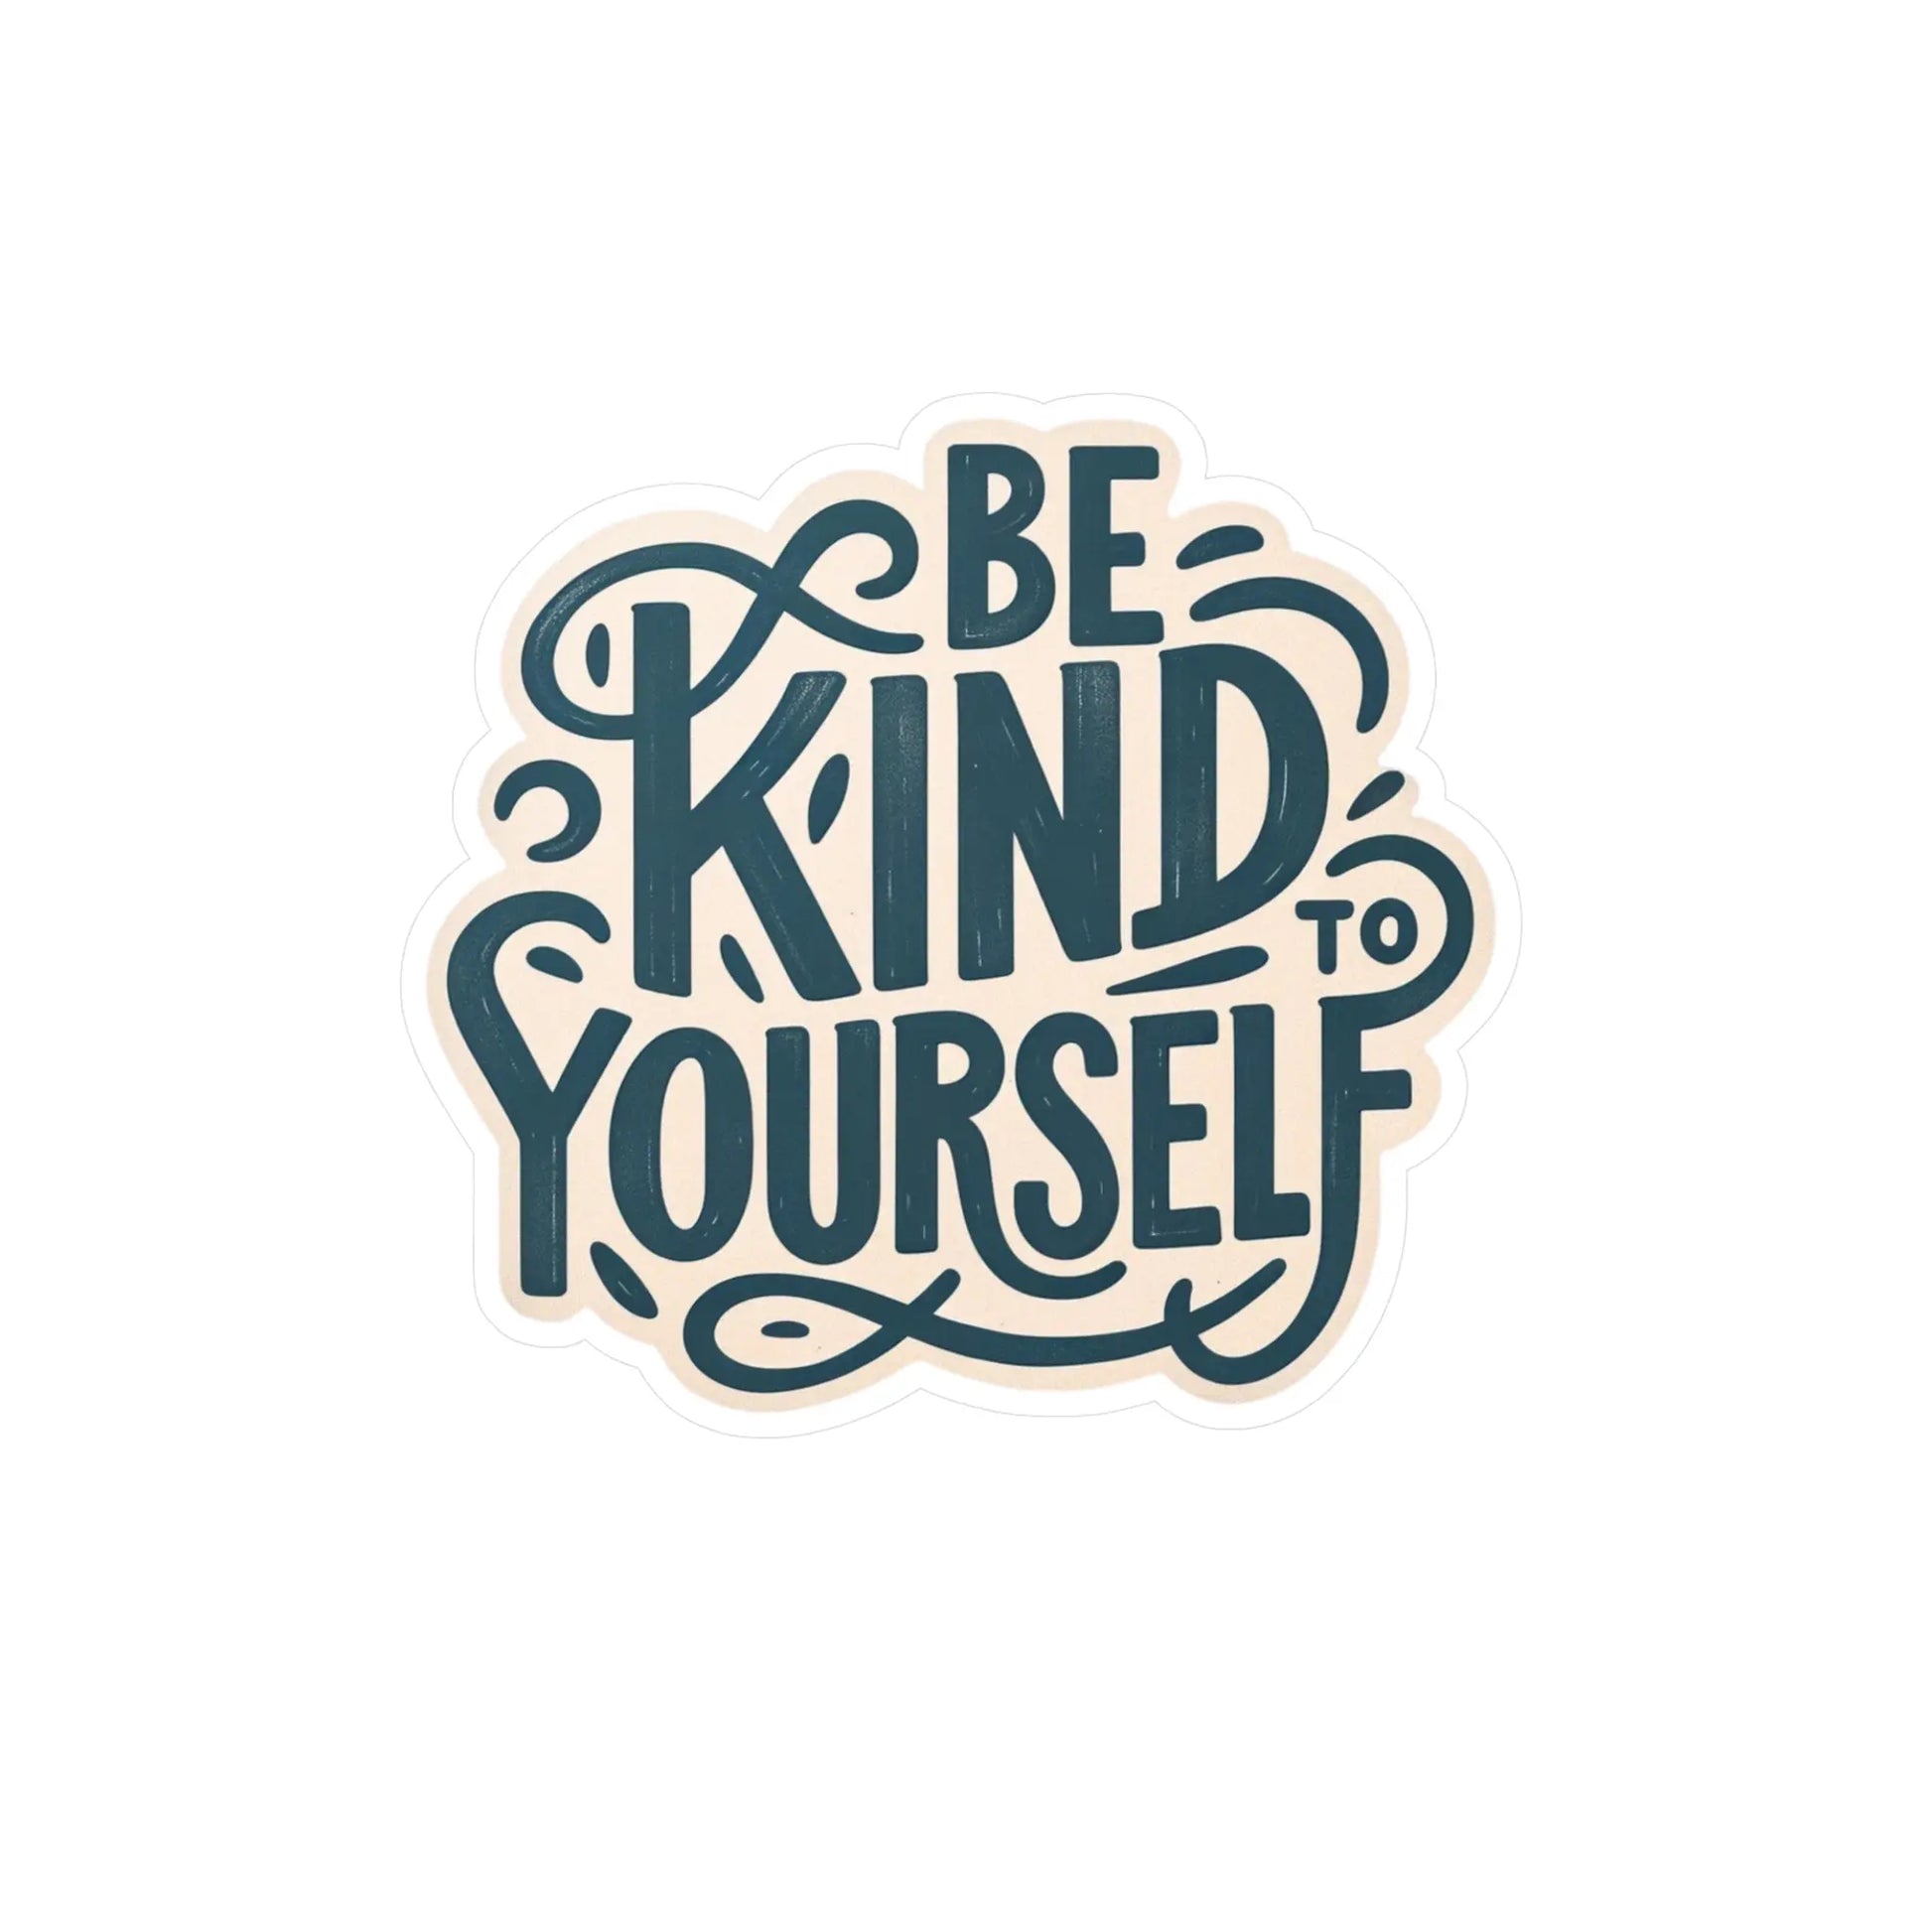 Kiss-Cut Vinyl Decal – "Be Kind to Yourself" Sticker